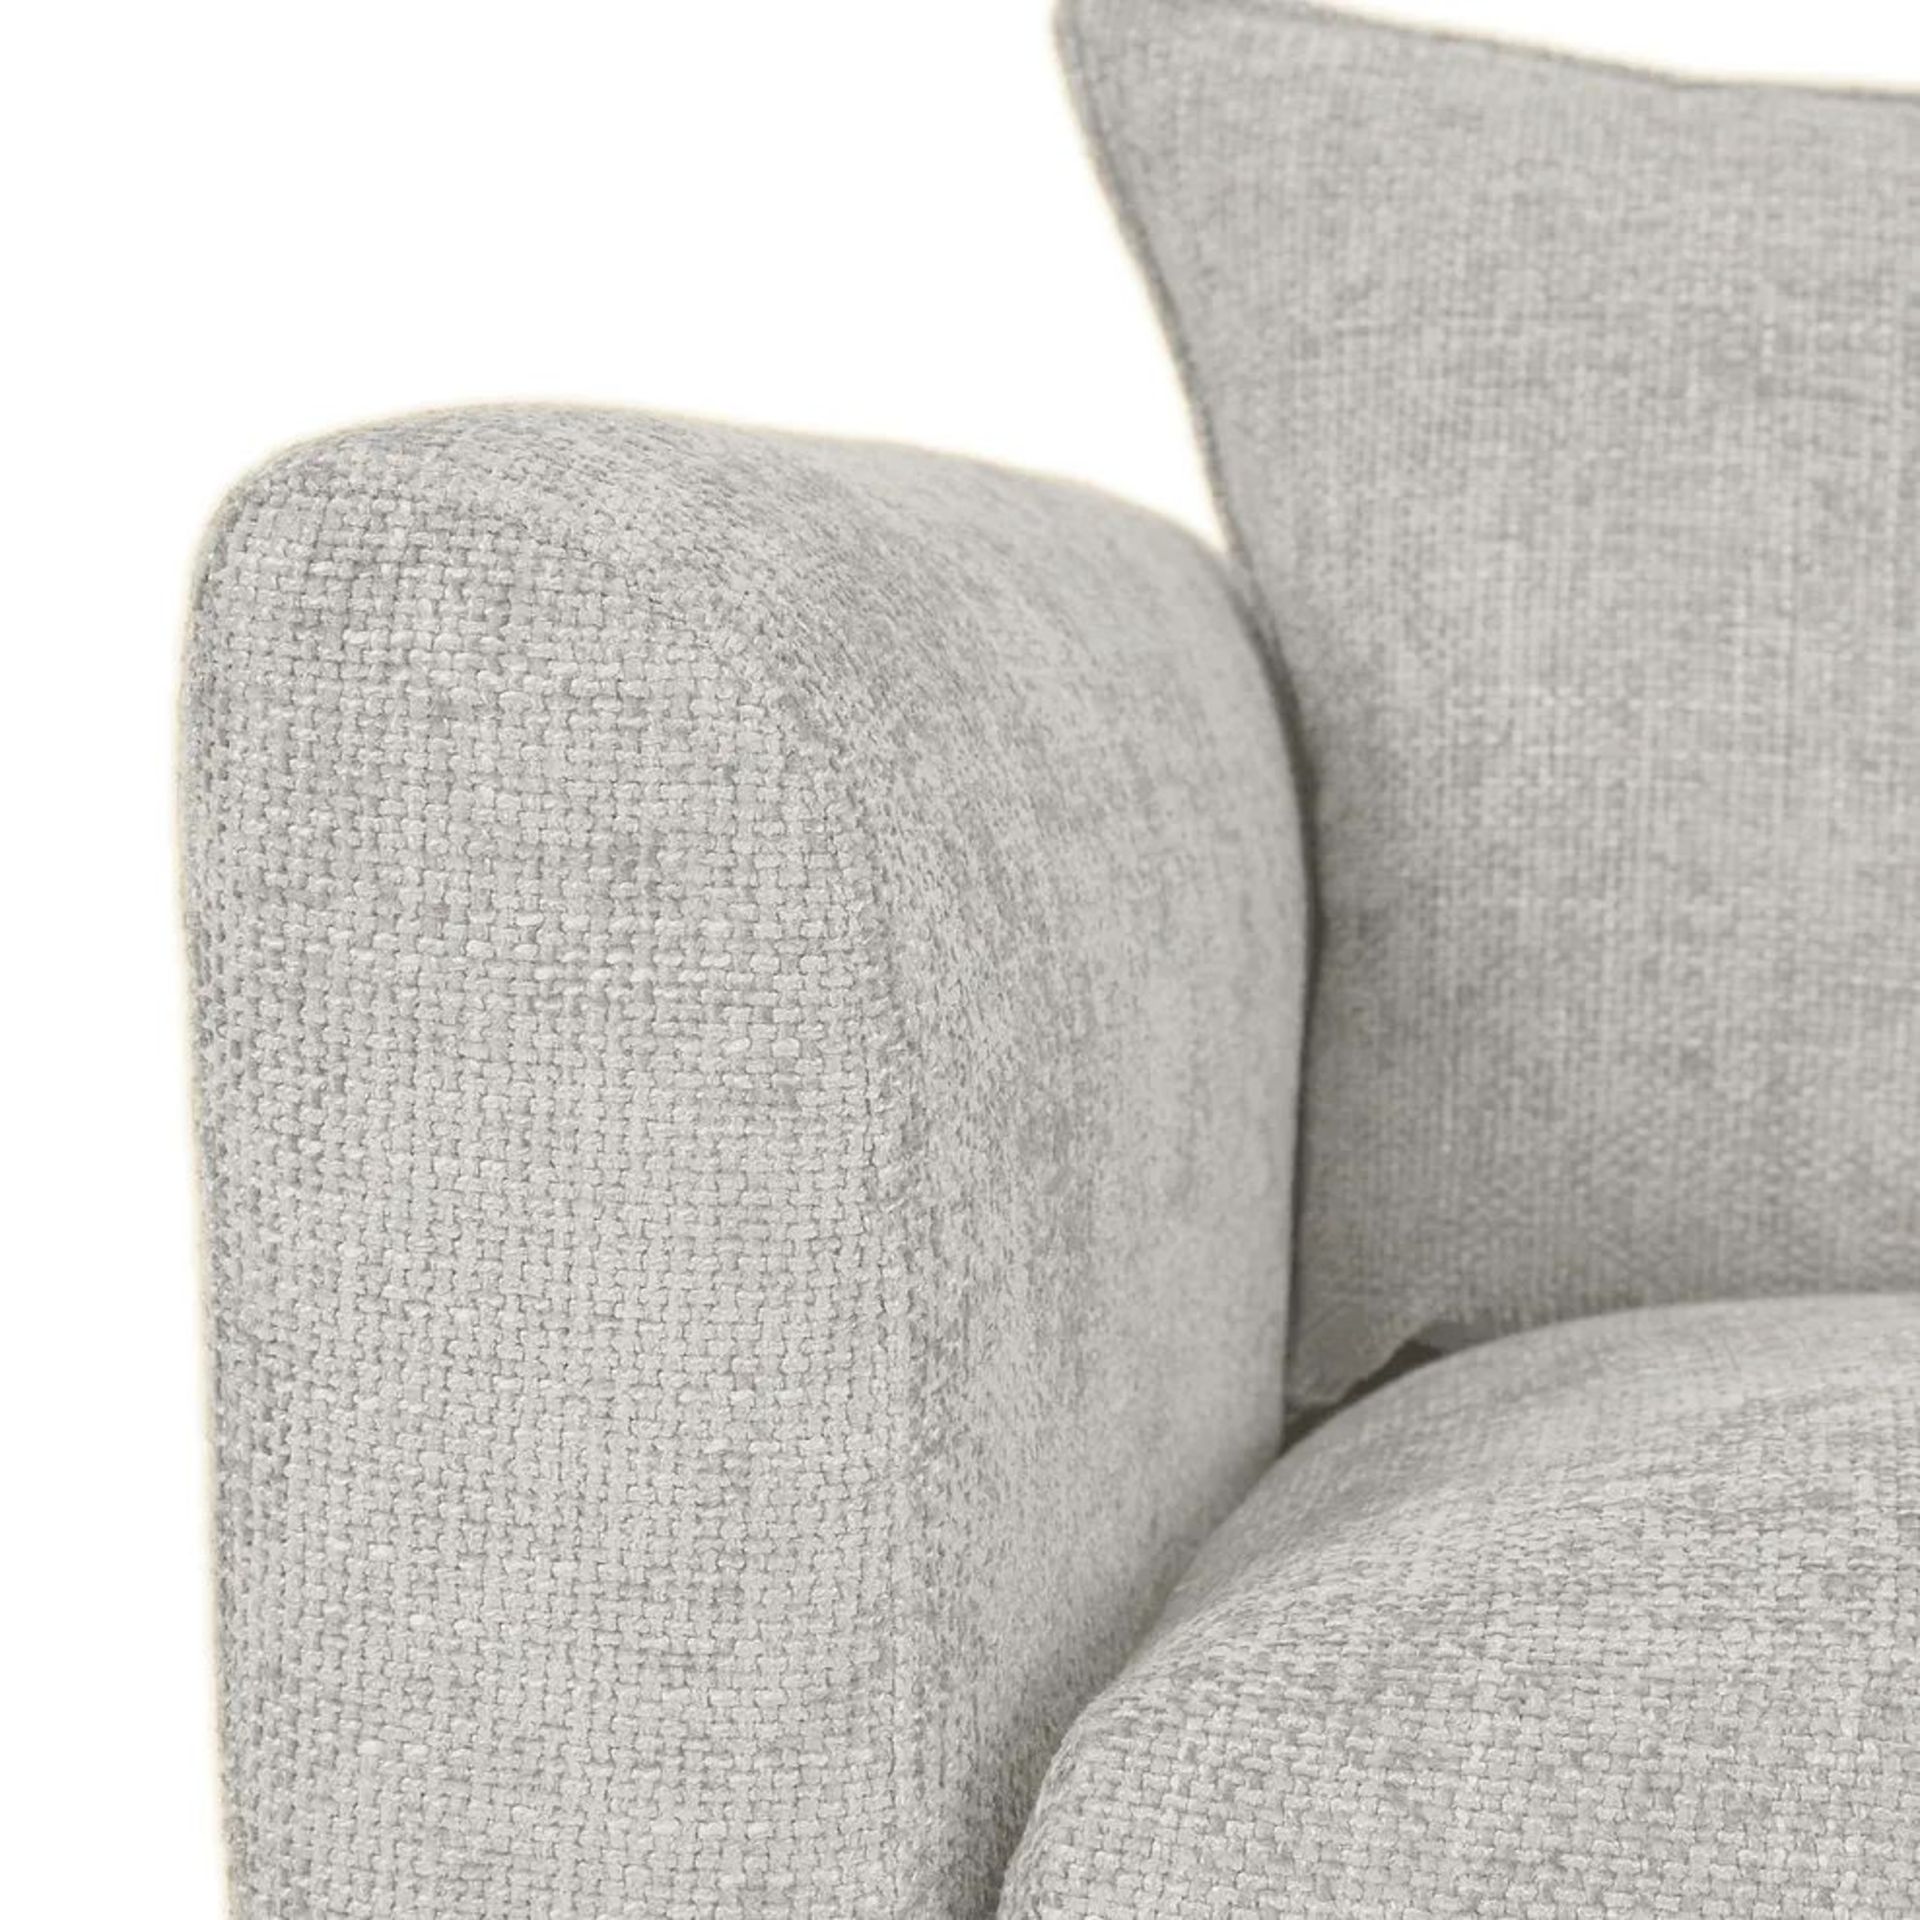 BRAND NEW DALBY 2 Seater Sofa - SILVER FABRIC. RRP £1569. Our Dalby 2-seater sofa, shown here in - Image 6 of 8